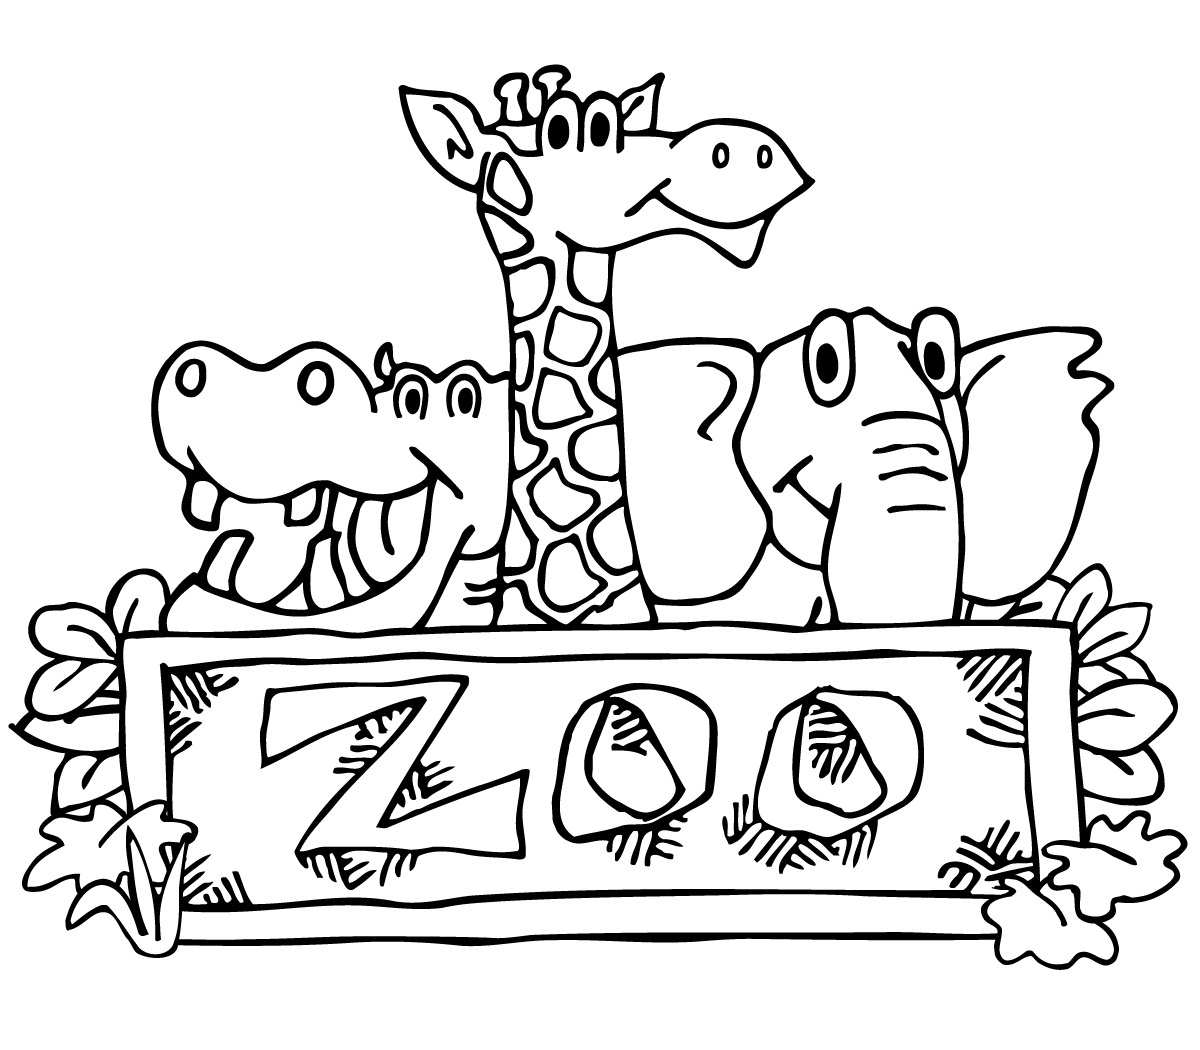 Zoo Clipart Black And White